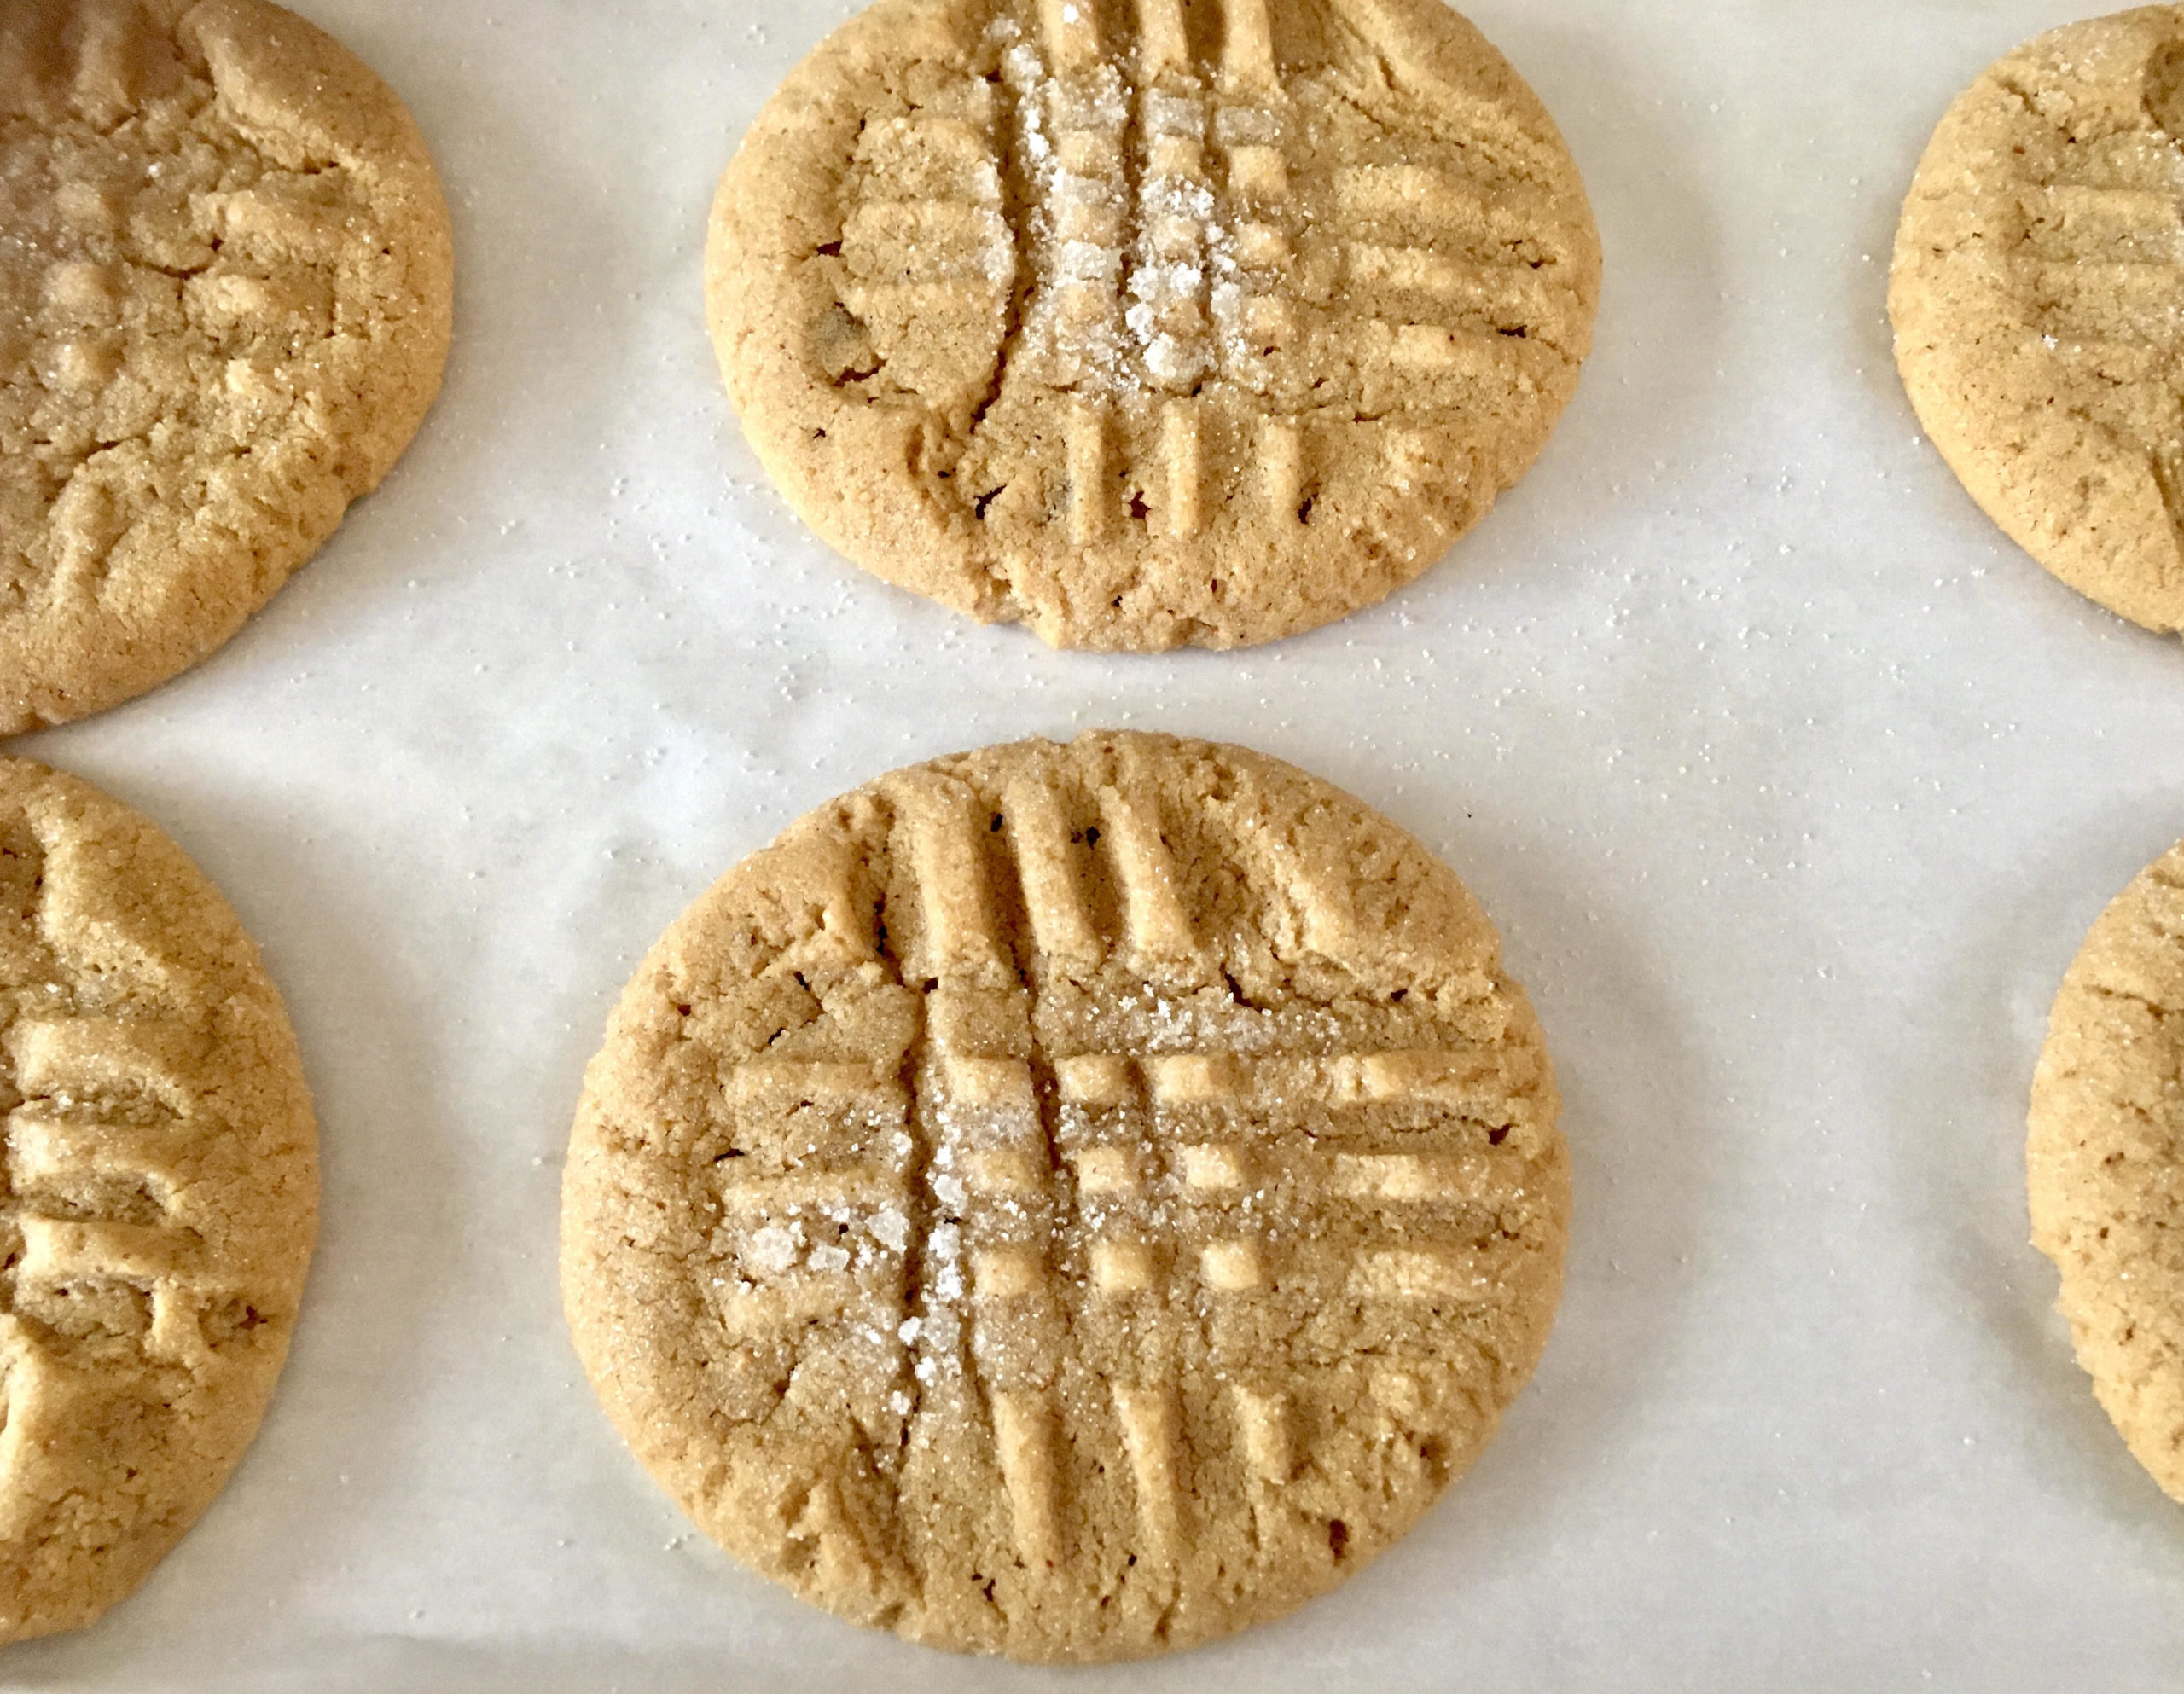 https://itseverythingdelicious.com/wp-content/uploads/2020/04/Peanut-Butter-Cookies-3-1-scaled.jpg